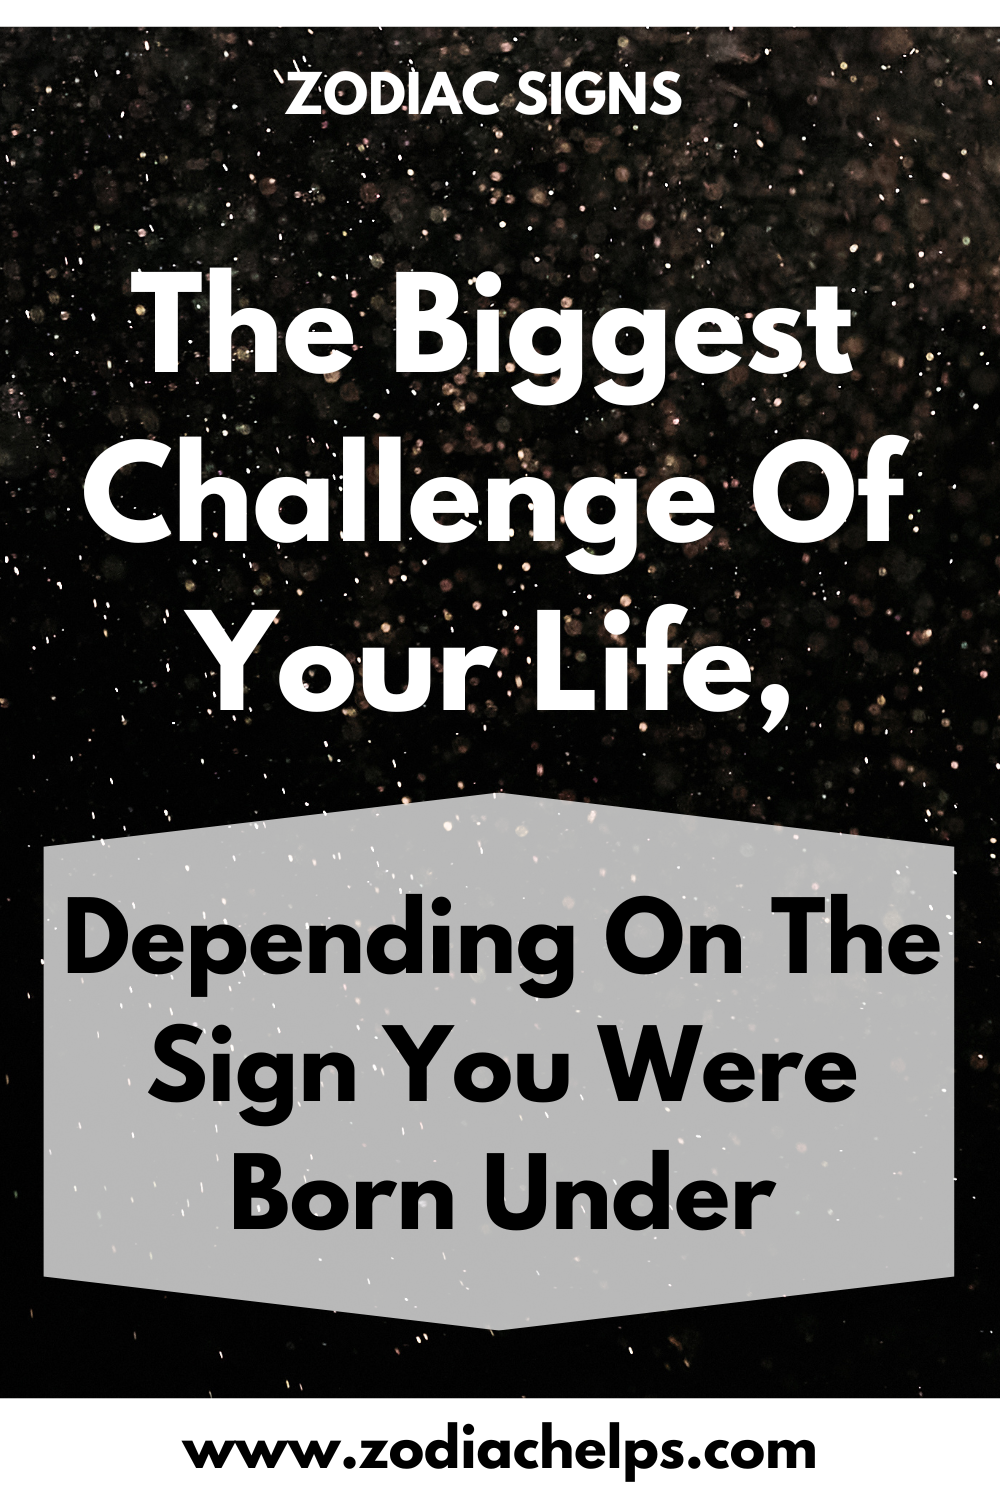 The Biggest Challenge Of Your Life, Depending On The Sign You Were Born Under